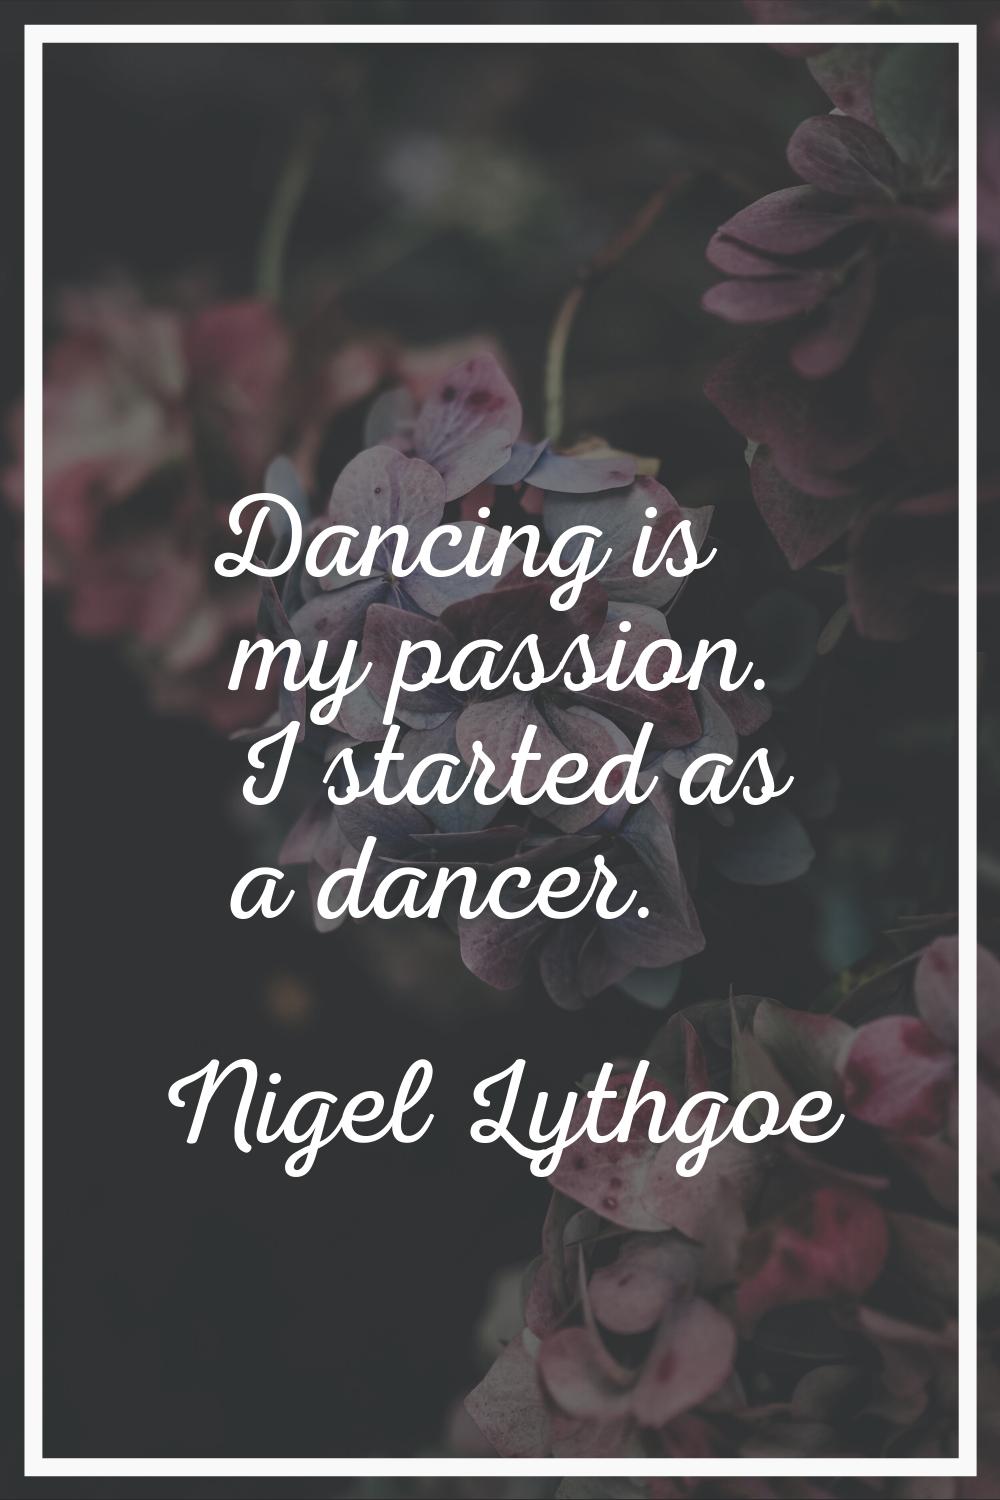 Dancing is my passion. I started as a dancer.